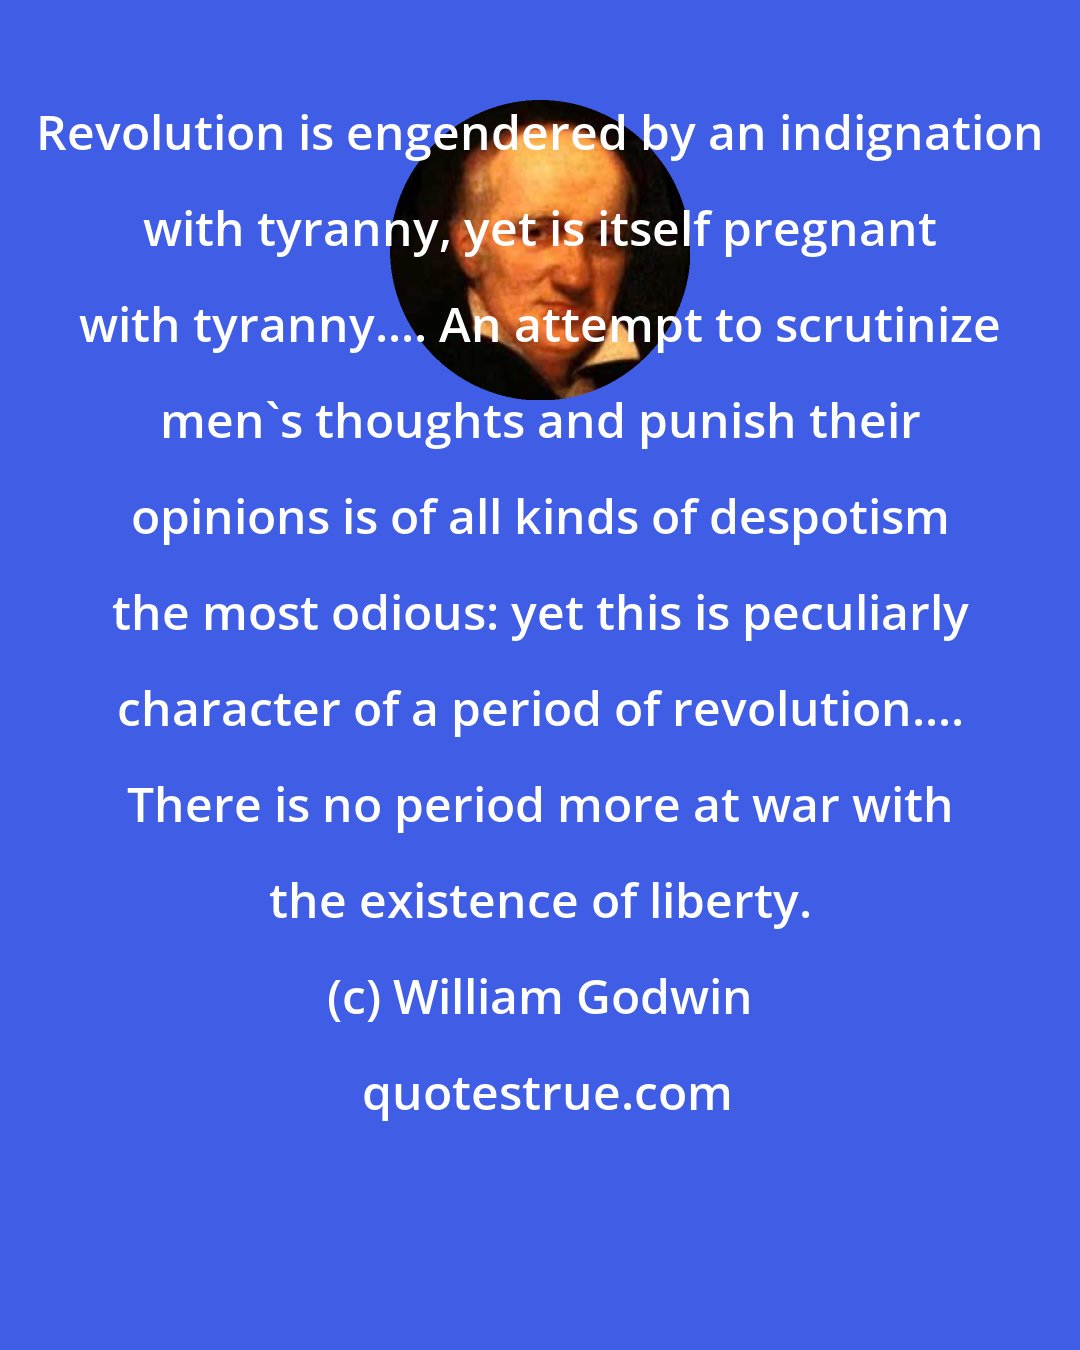 William Godwin: Revolution is engendered by an indignation with tyranny, yet is itself pregnant with tyranny.... An attempt to scrutinize men's thoughts and punish their opinions is of all kinds of despotism the most odious: yet this is peculiarly character of a period of revolution.... There is no period more at war with the existence of liberty.